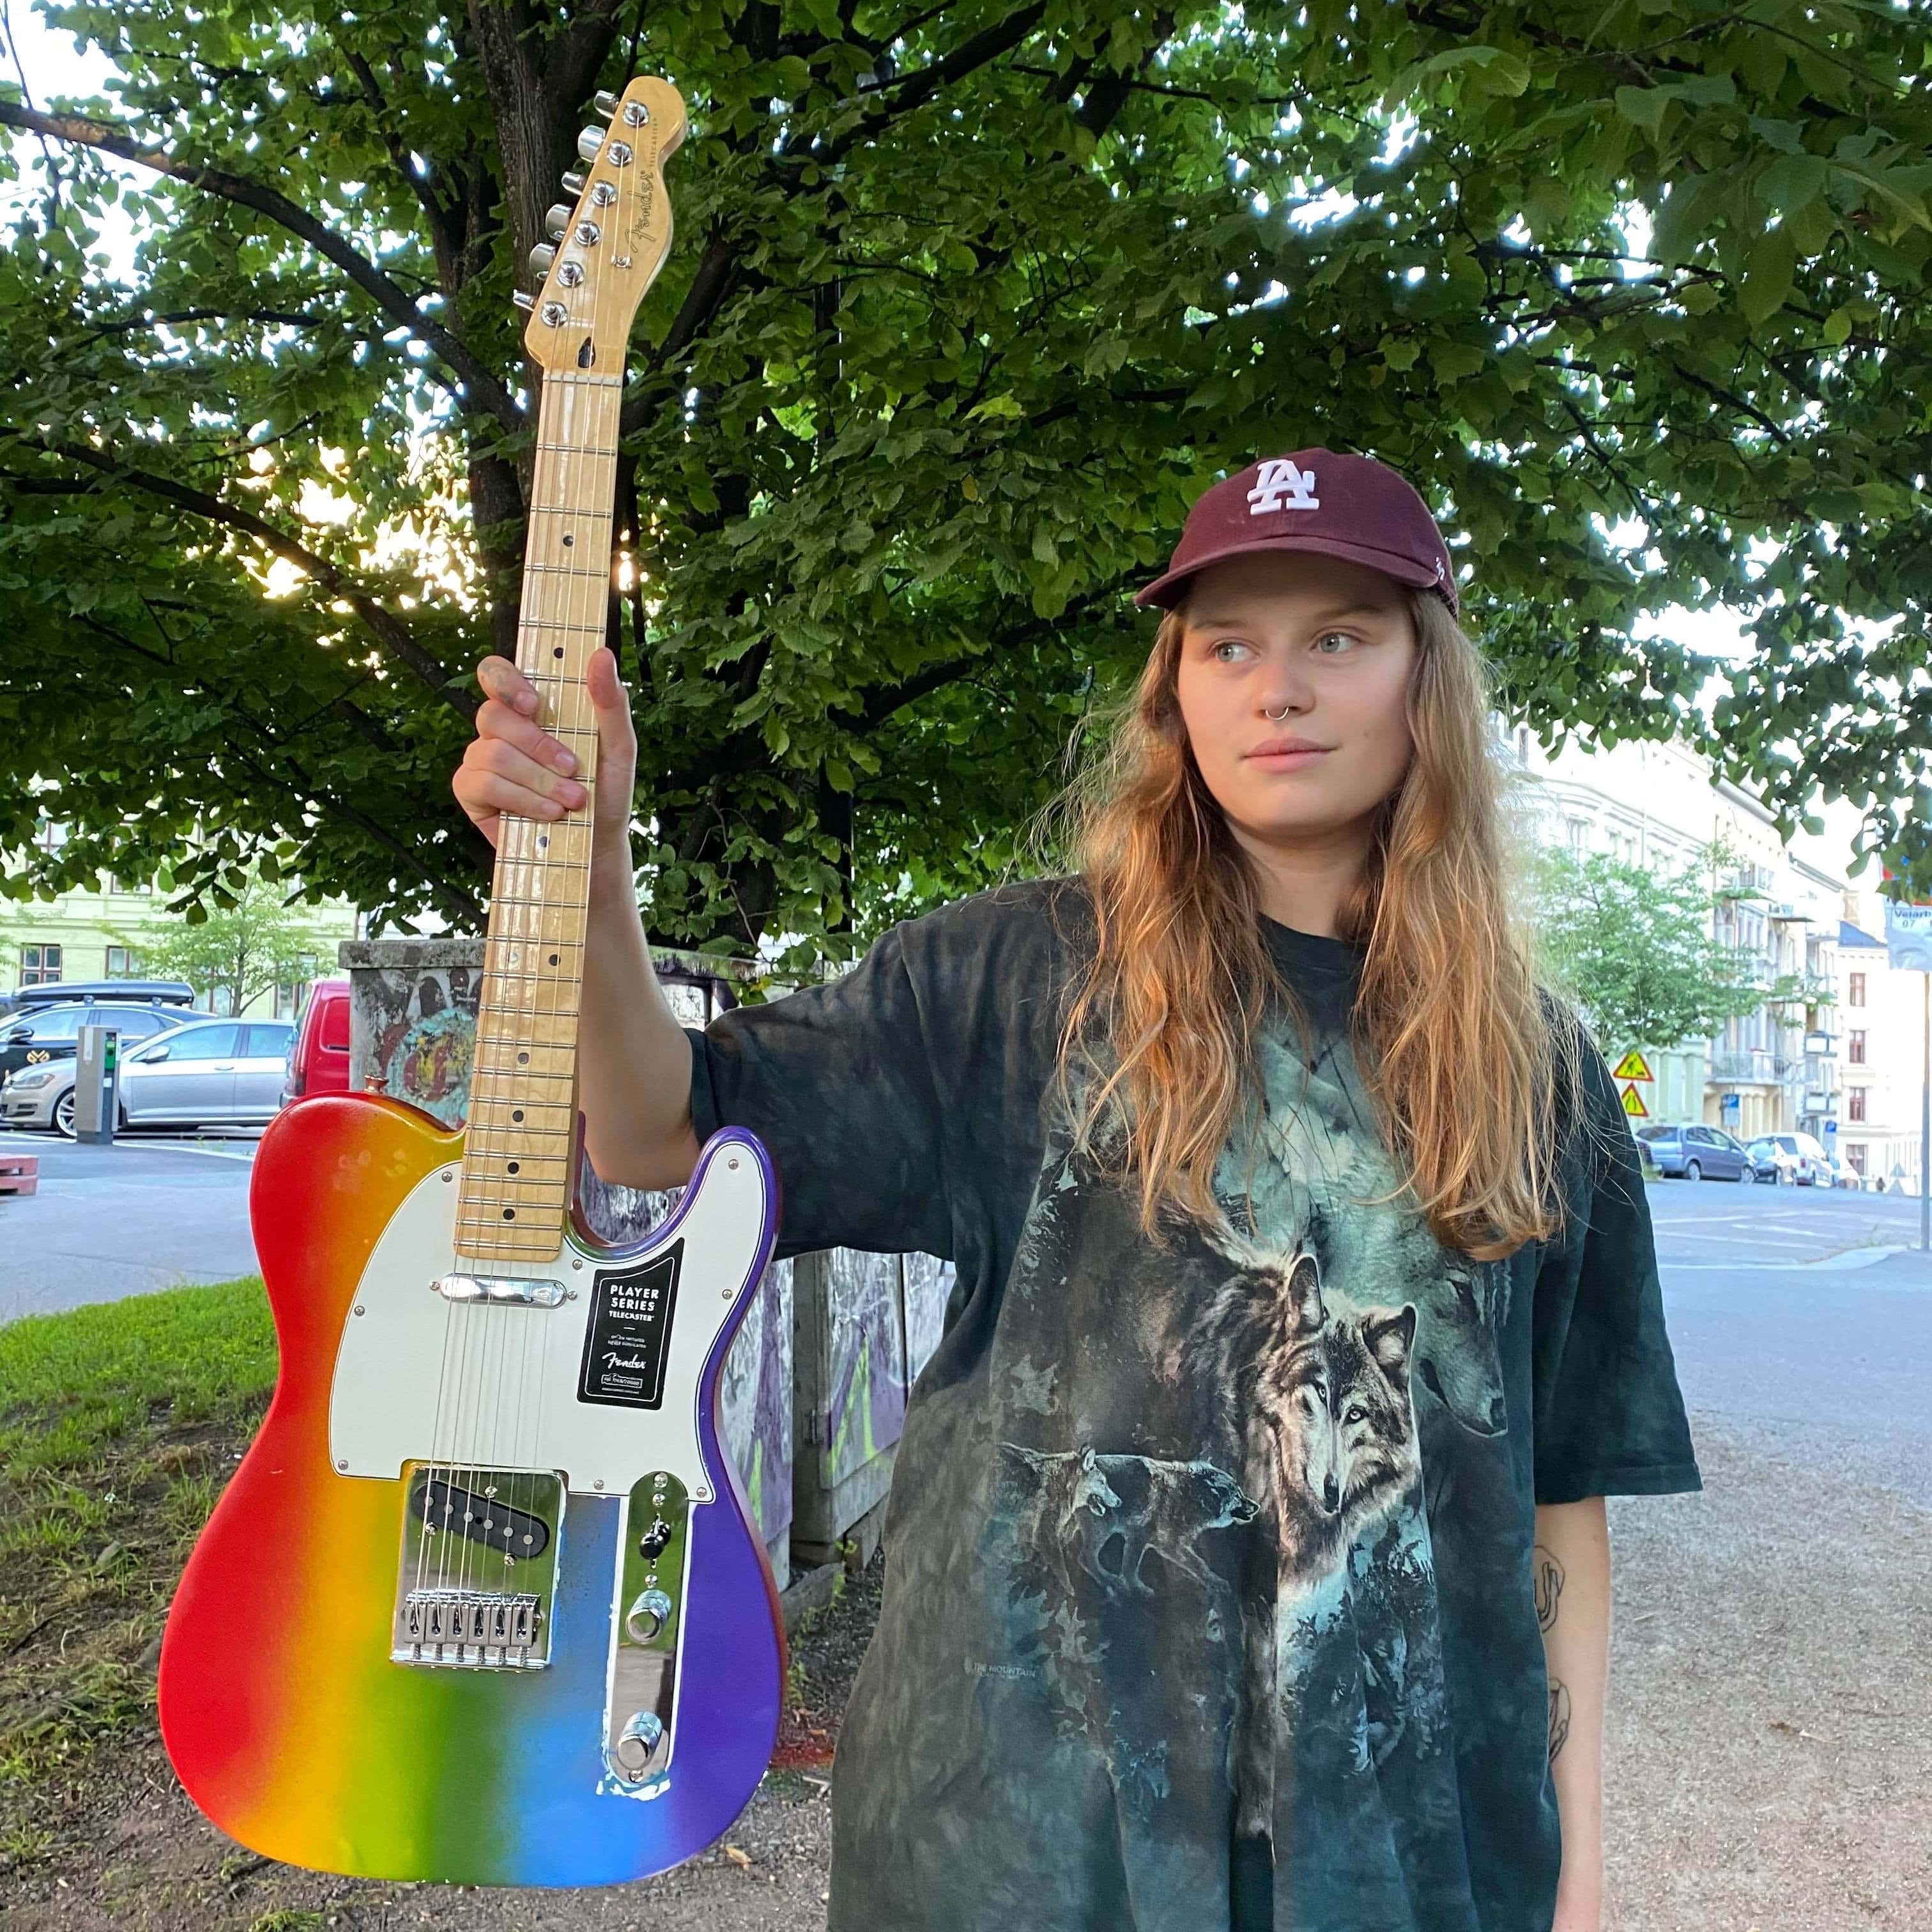 Pop Songwriter girl in red Designs A One-of-a-kind Rainbow Fender To Raise Money For Kaleidoscope Trust In Support Of The Global LGBTQ+ Community